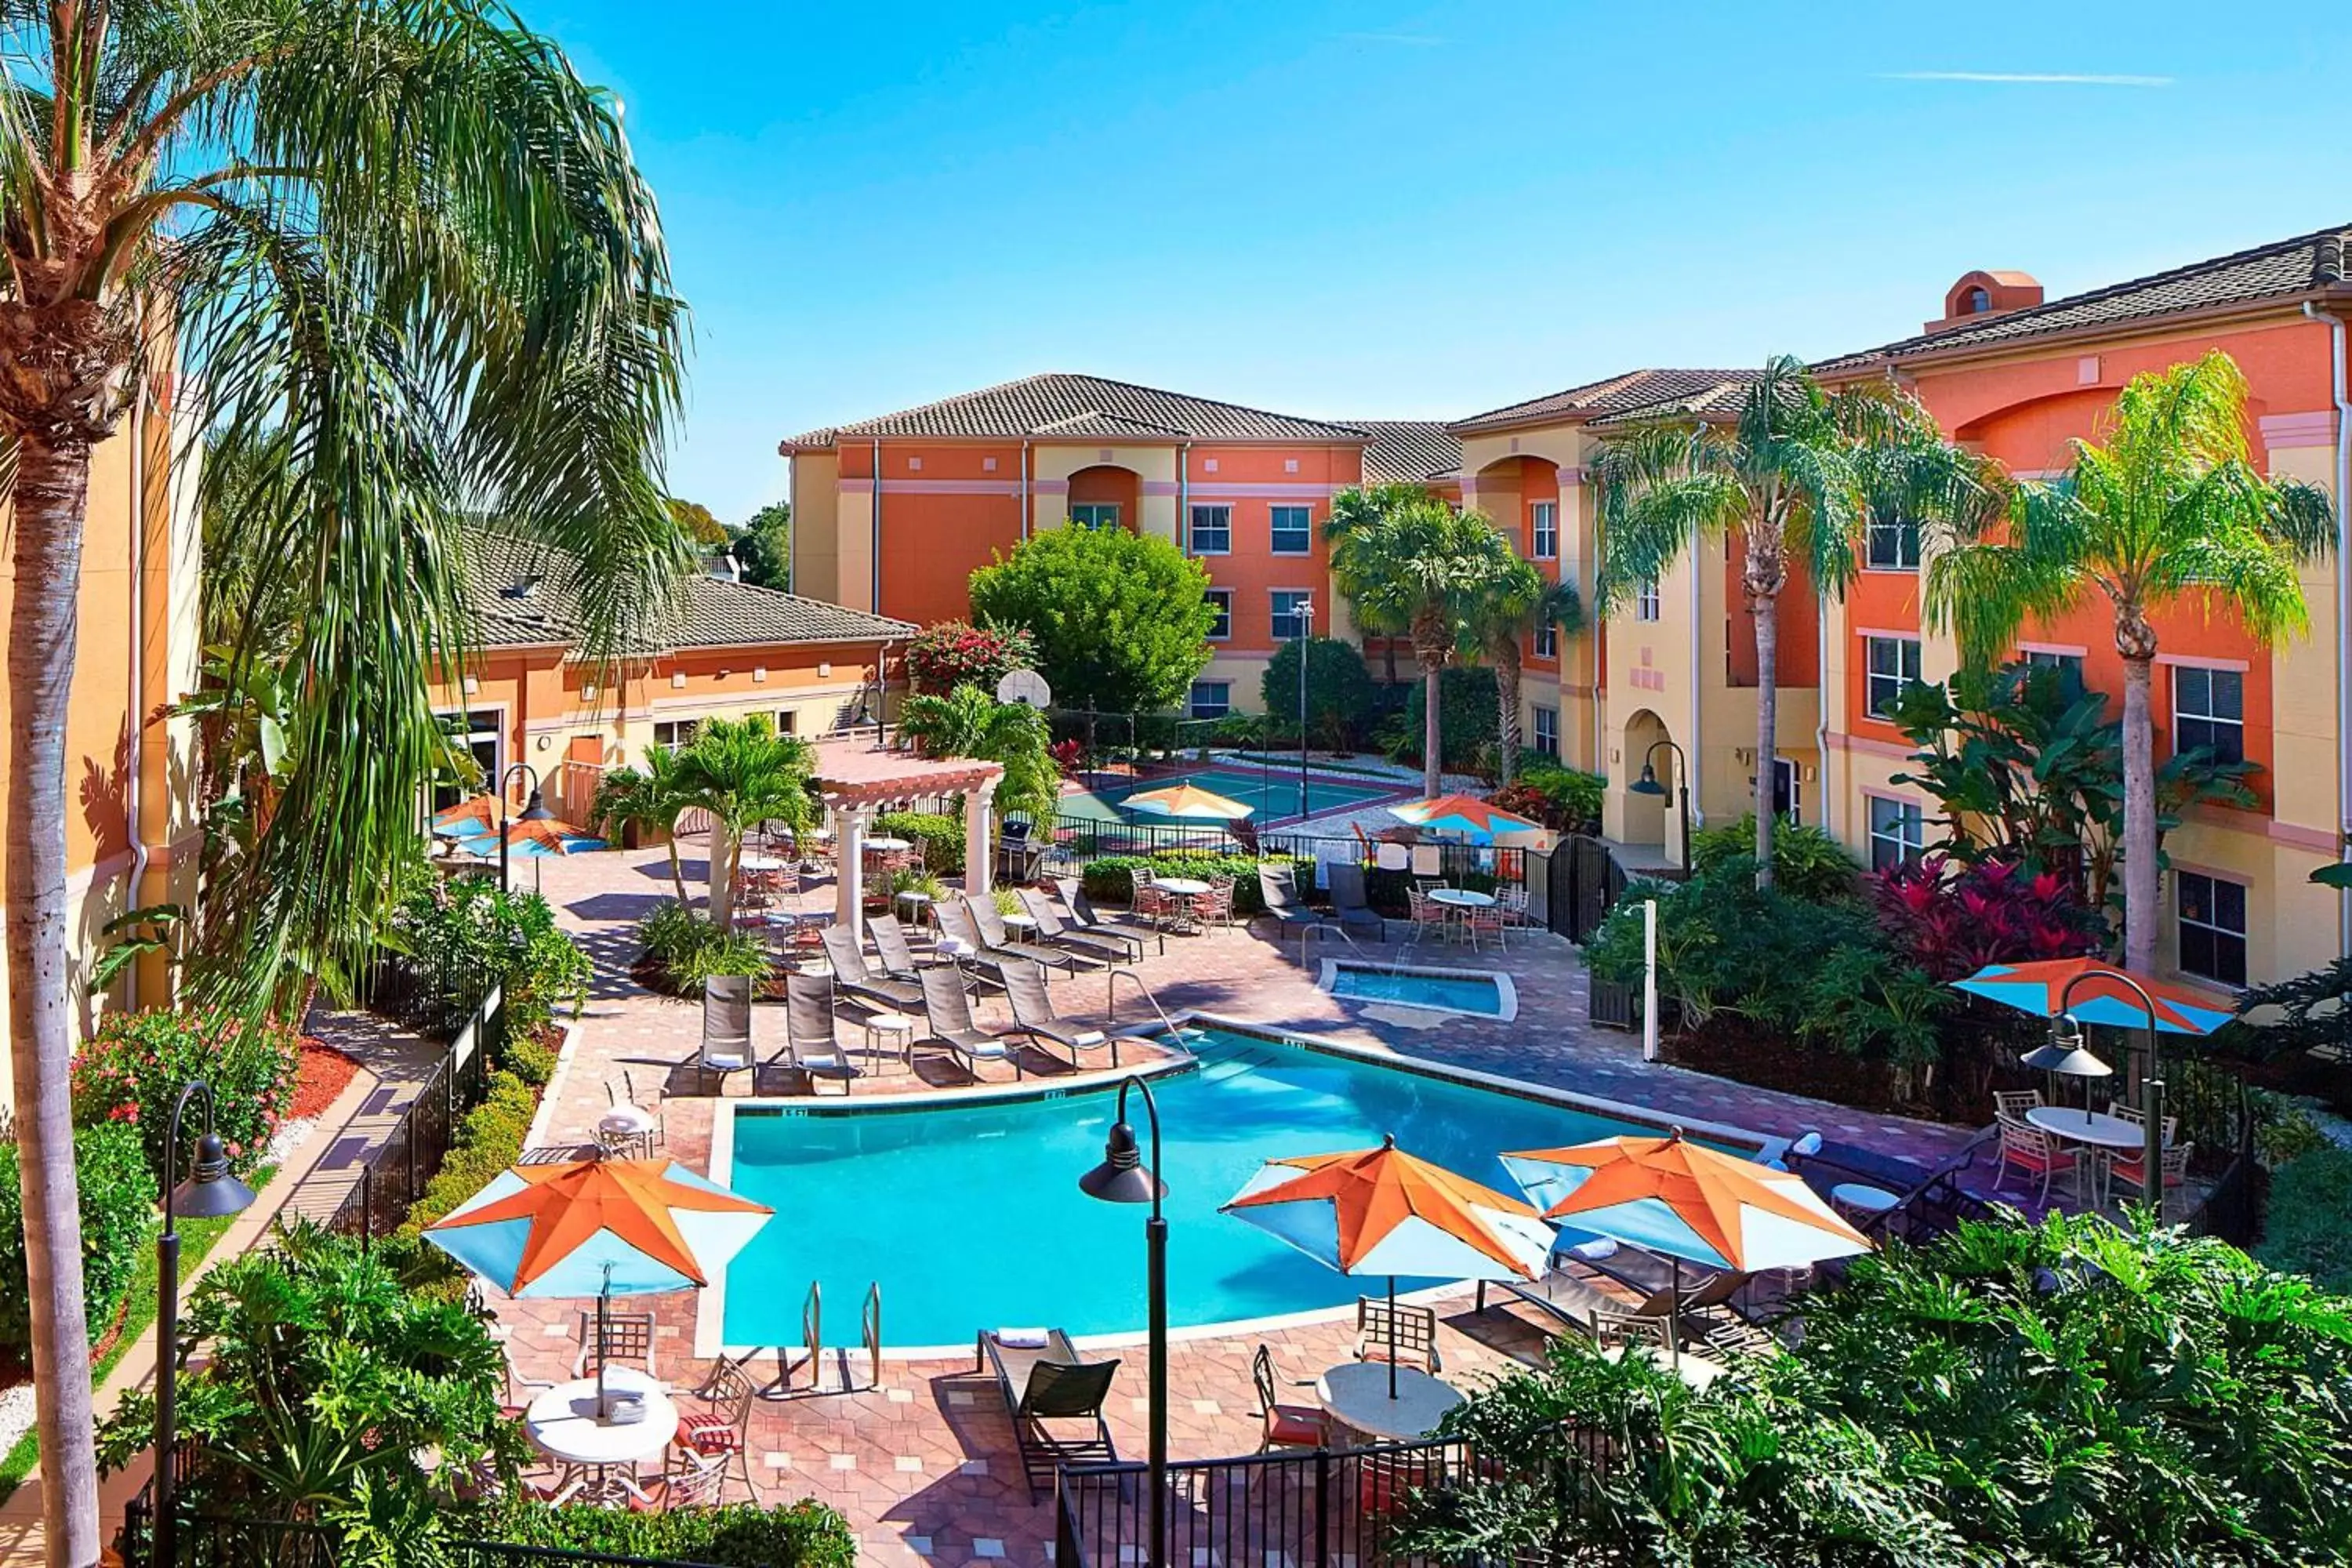 Property building, Pool View in Residence Inn by Marriott Naples